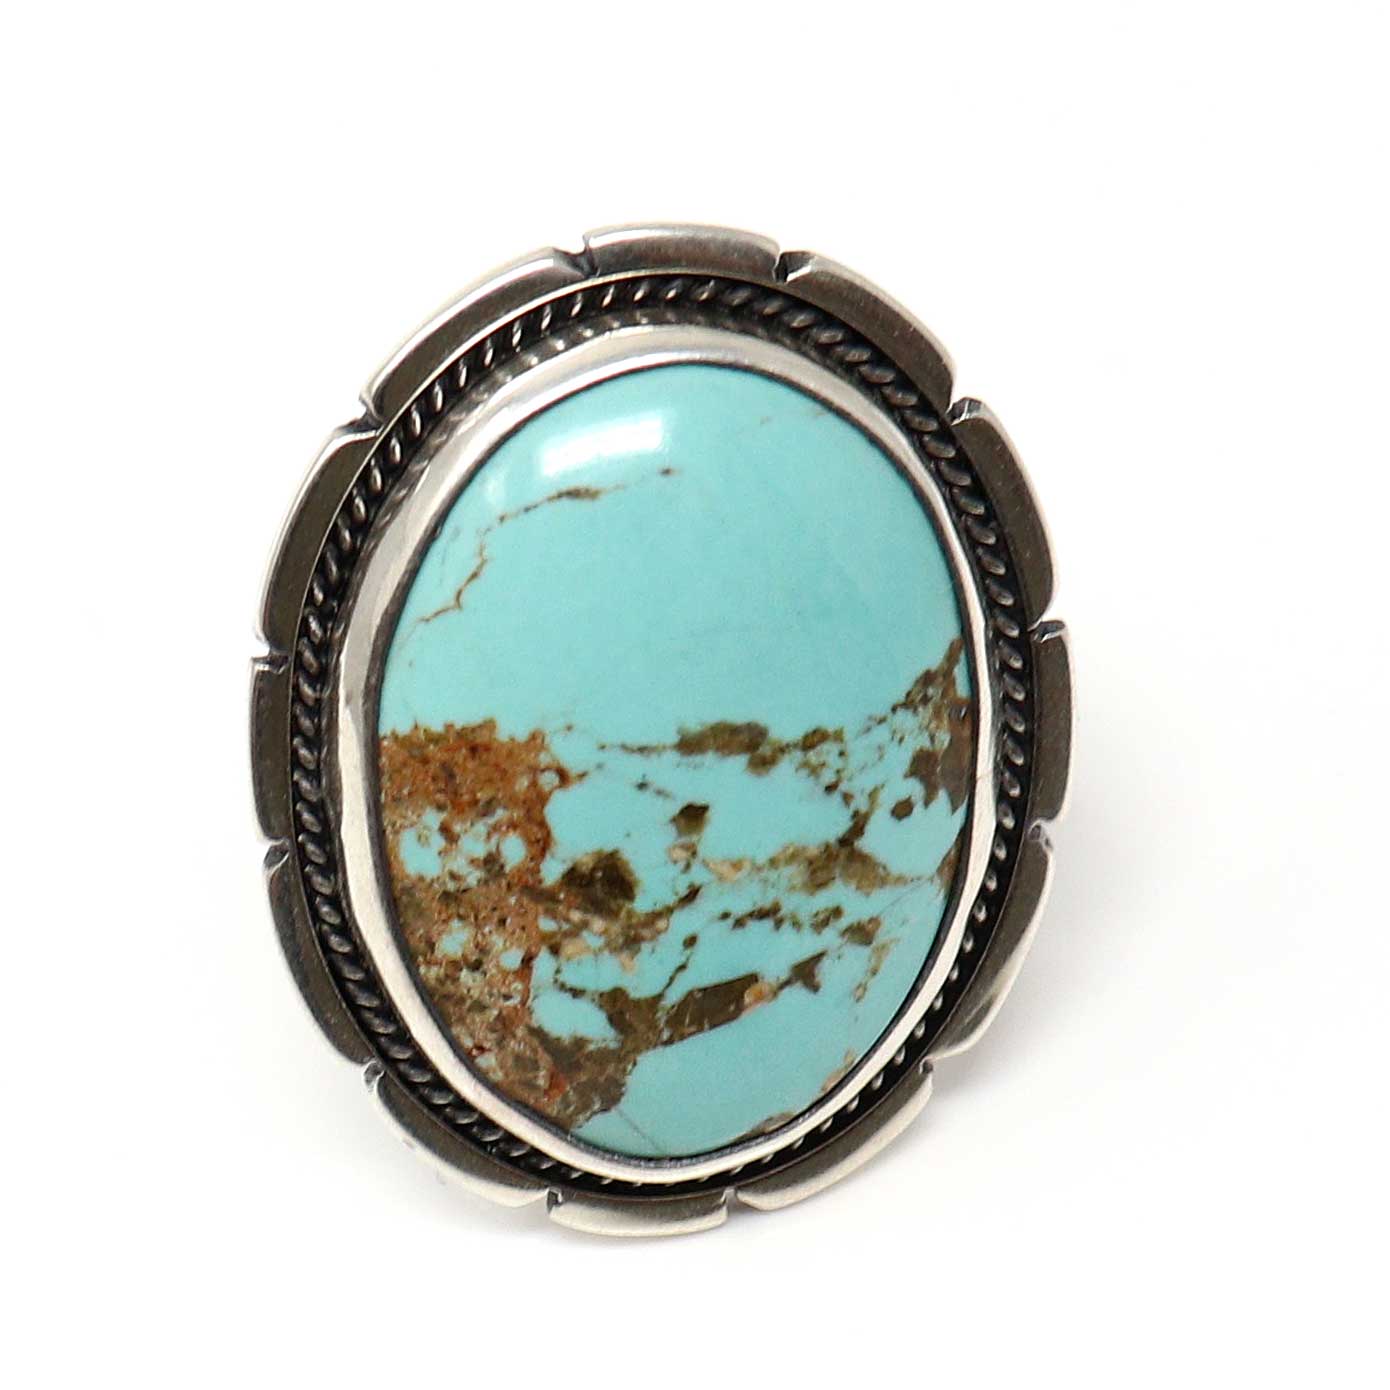 Adjustable Ring With Kingman Turquoise Setting By Navaho Artist Ryland Billie